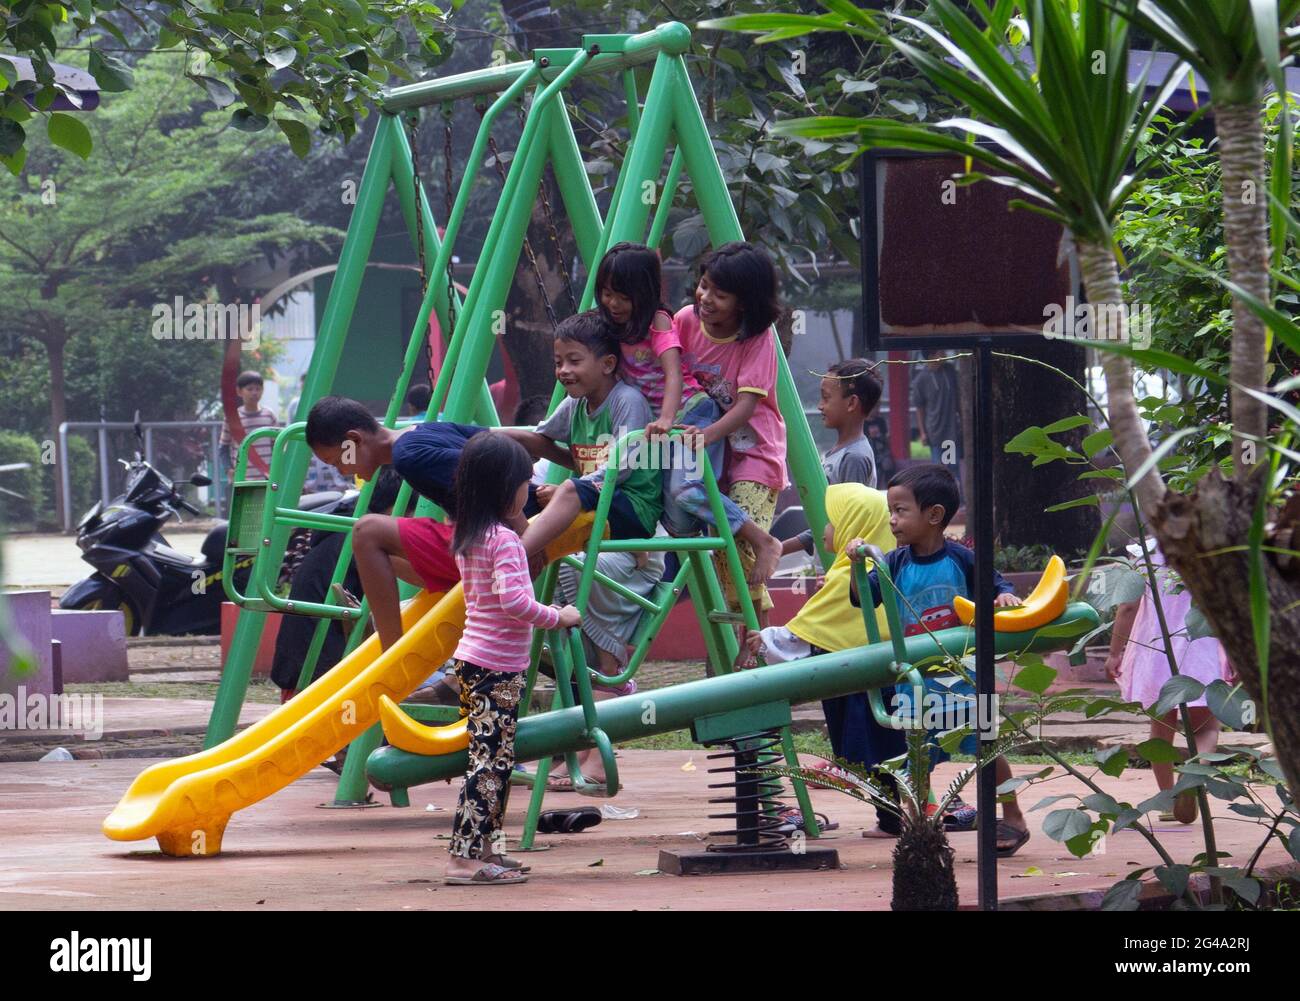 Four children playing in a playground - Stock Image - F033/7416 - Science  Photo Library